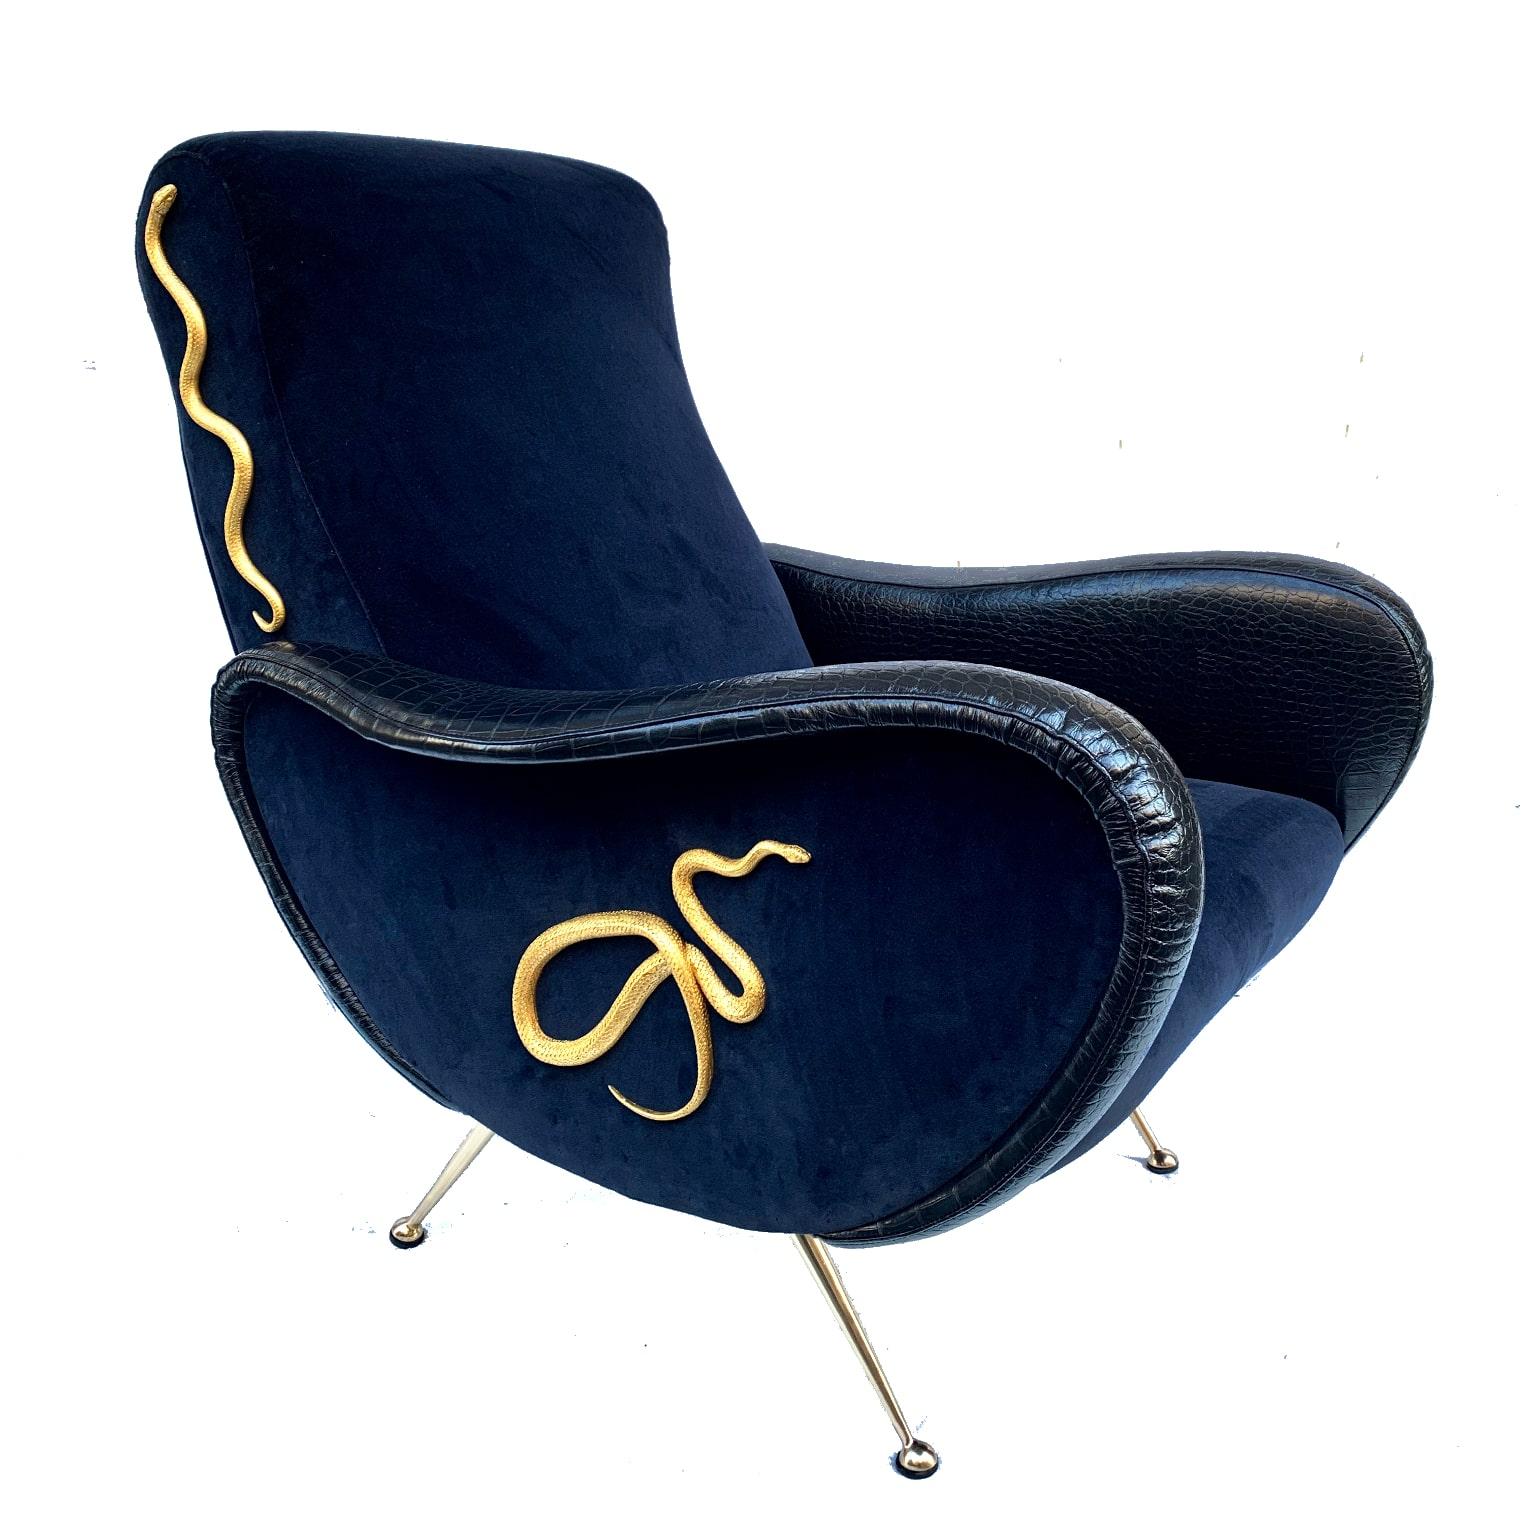 This armchair with footrest is a one-of-a-kind piece designed and realized by Giampiero Romanò, who melted the vintage style of the 60s with his creativity.
Upholstered with an electric dark blue velvet and reptile print leather on the armrests,